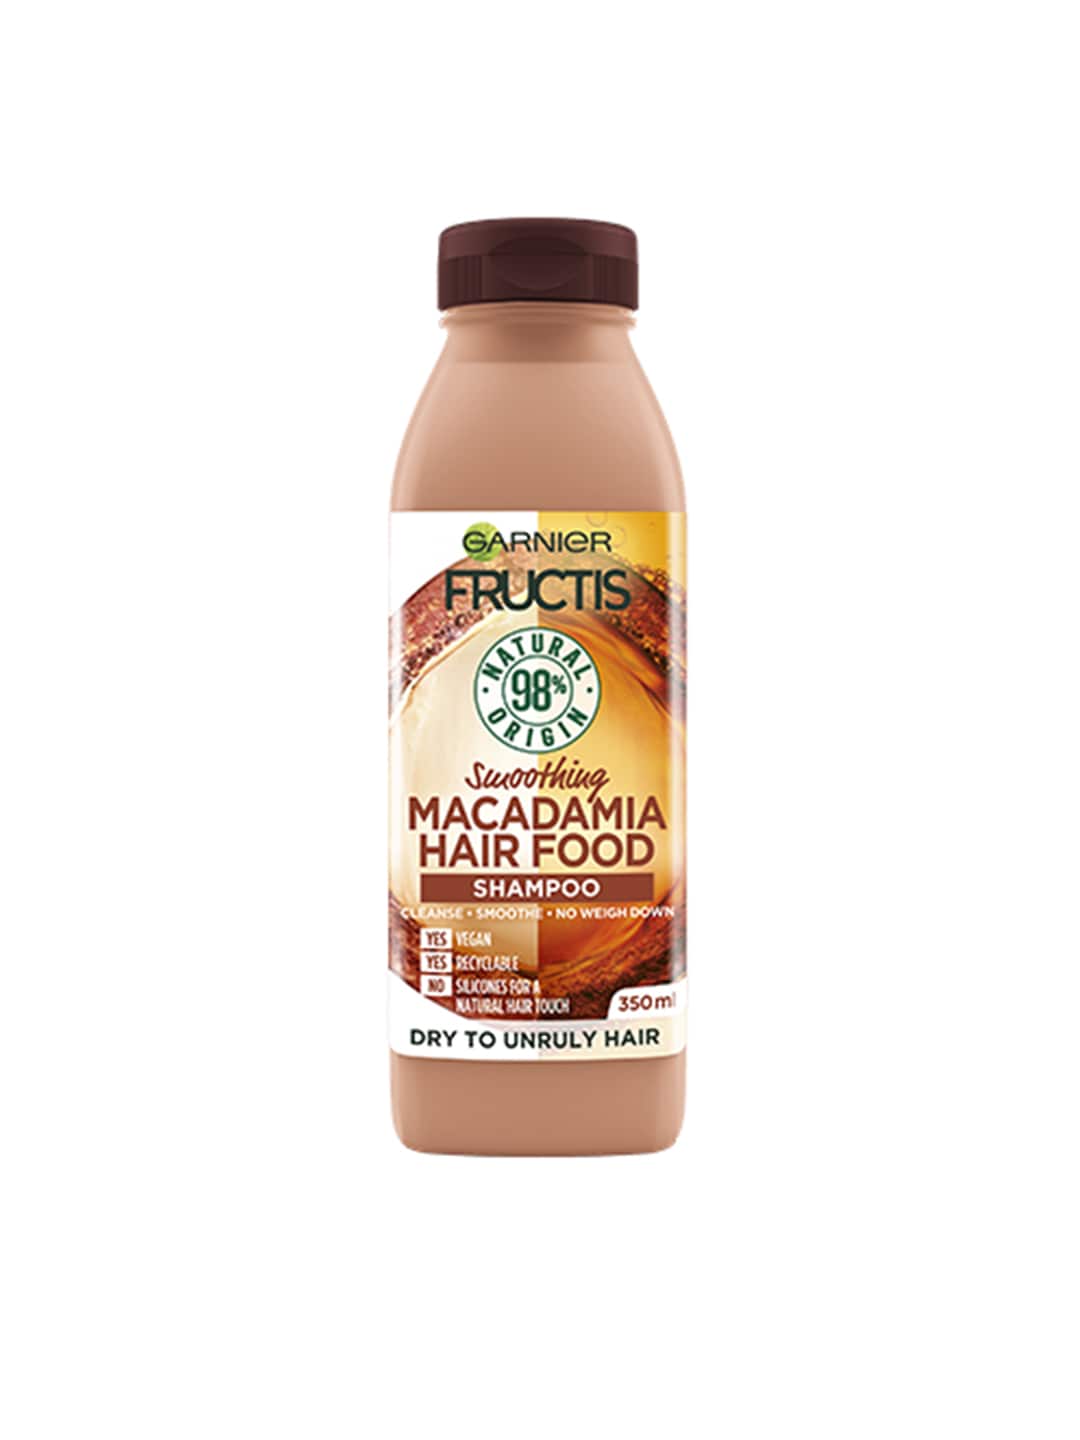 Garnier Fructis Hair Food - Smoothing Macadamia Shampoo For Dry Unruly Hair 350ml Price in India